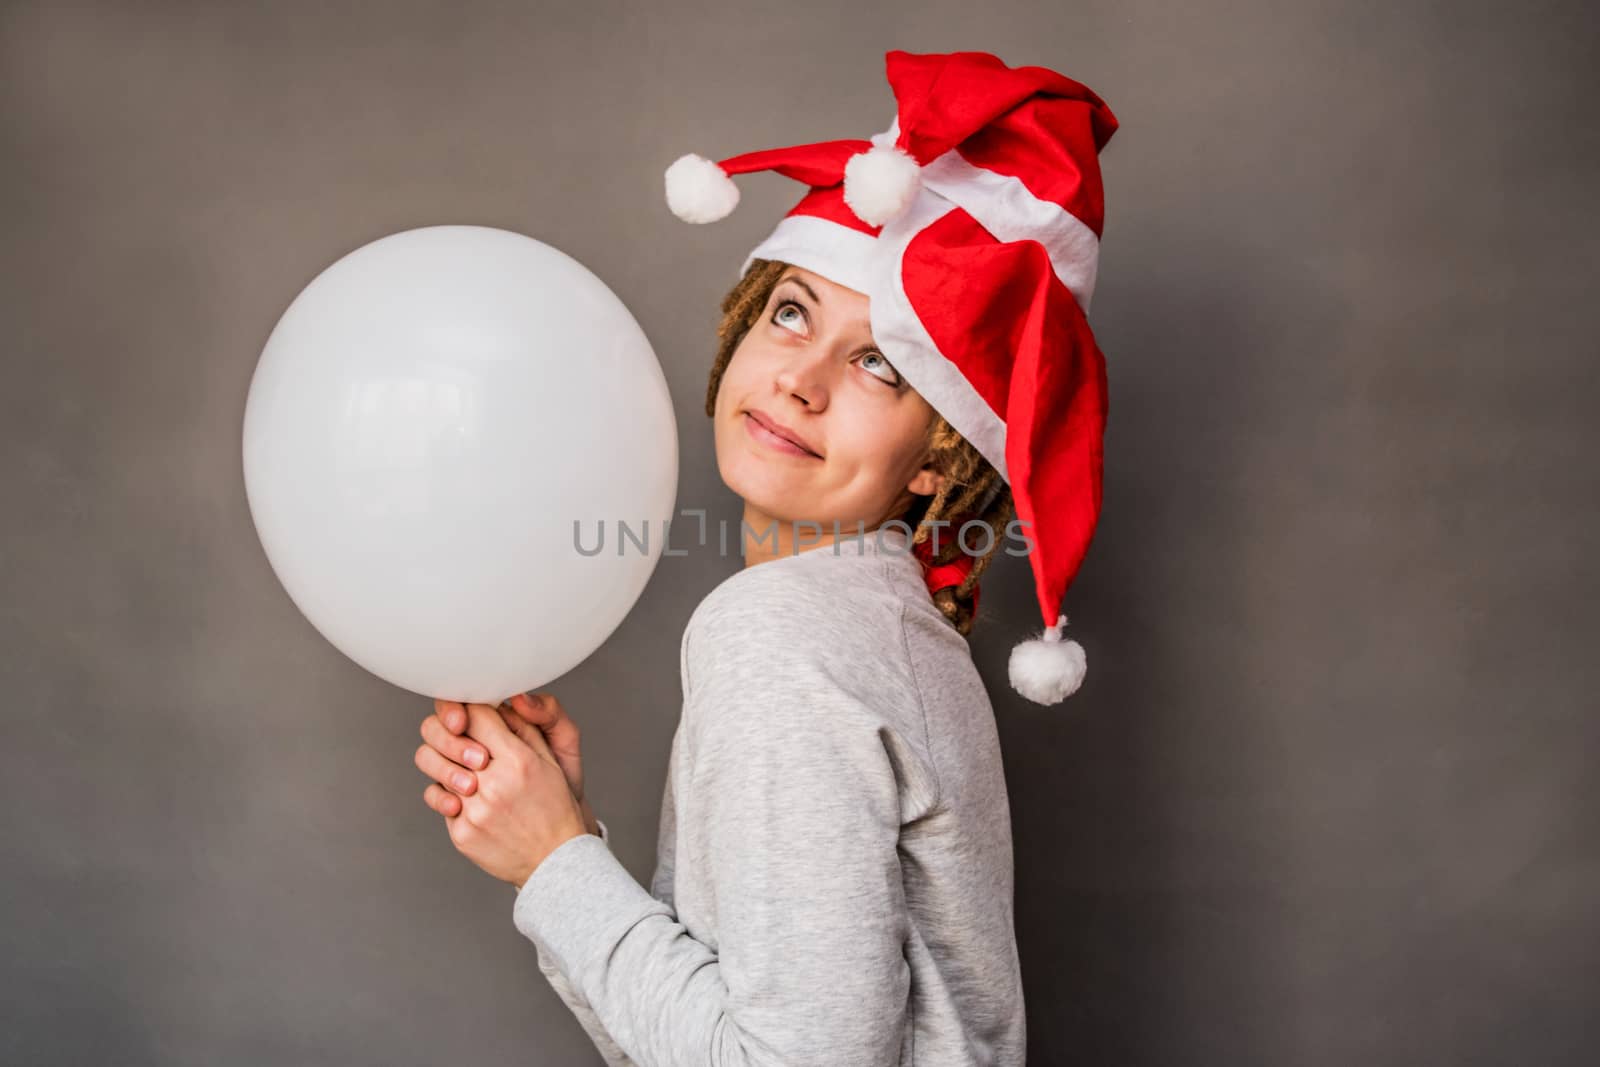 christmas concept. young caucasian woman with tree santa hats holding a balloon dreaming and smiling